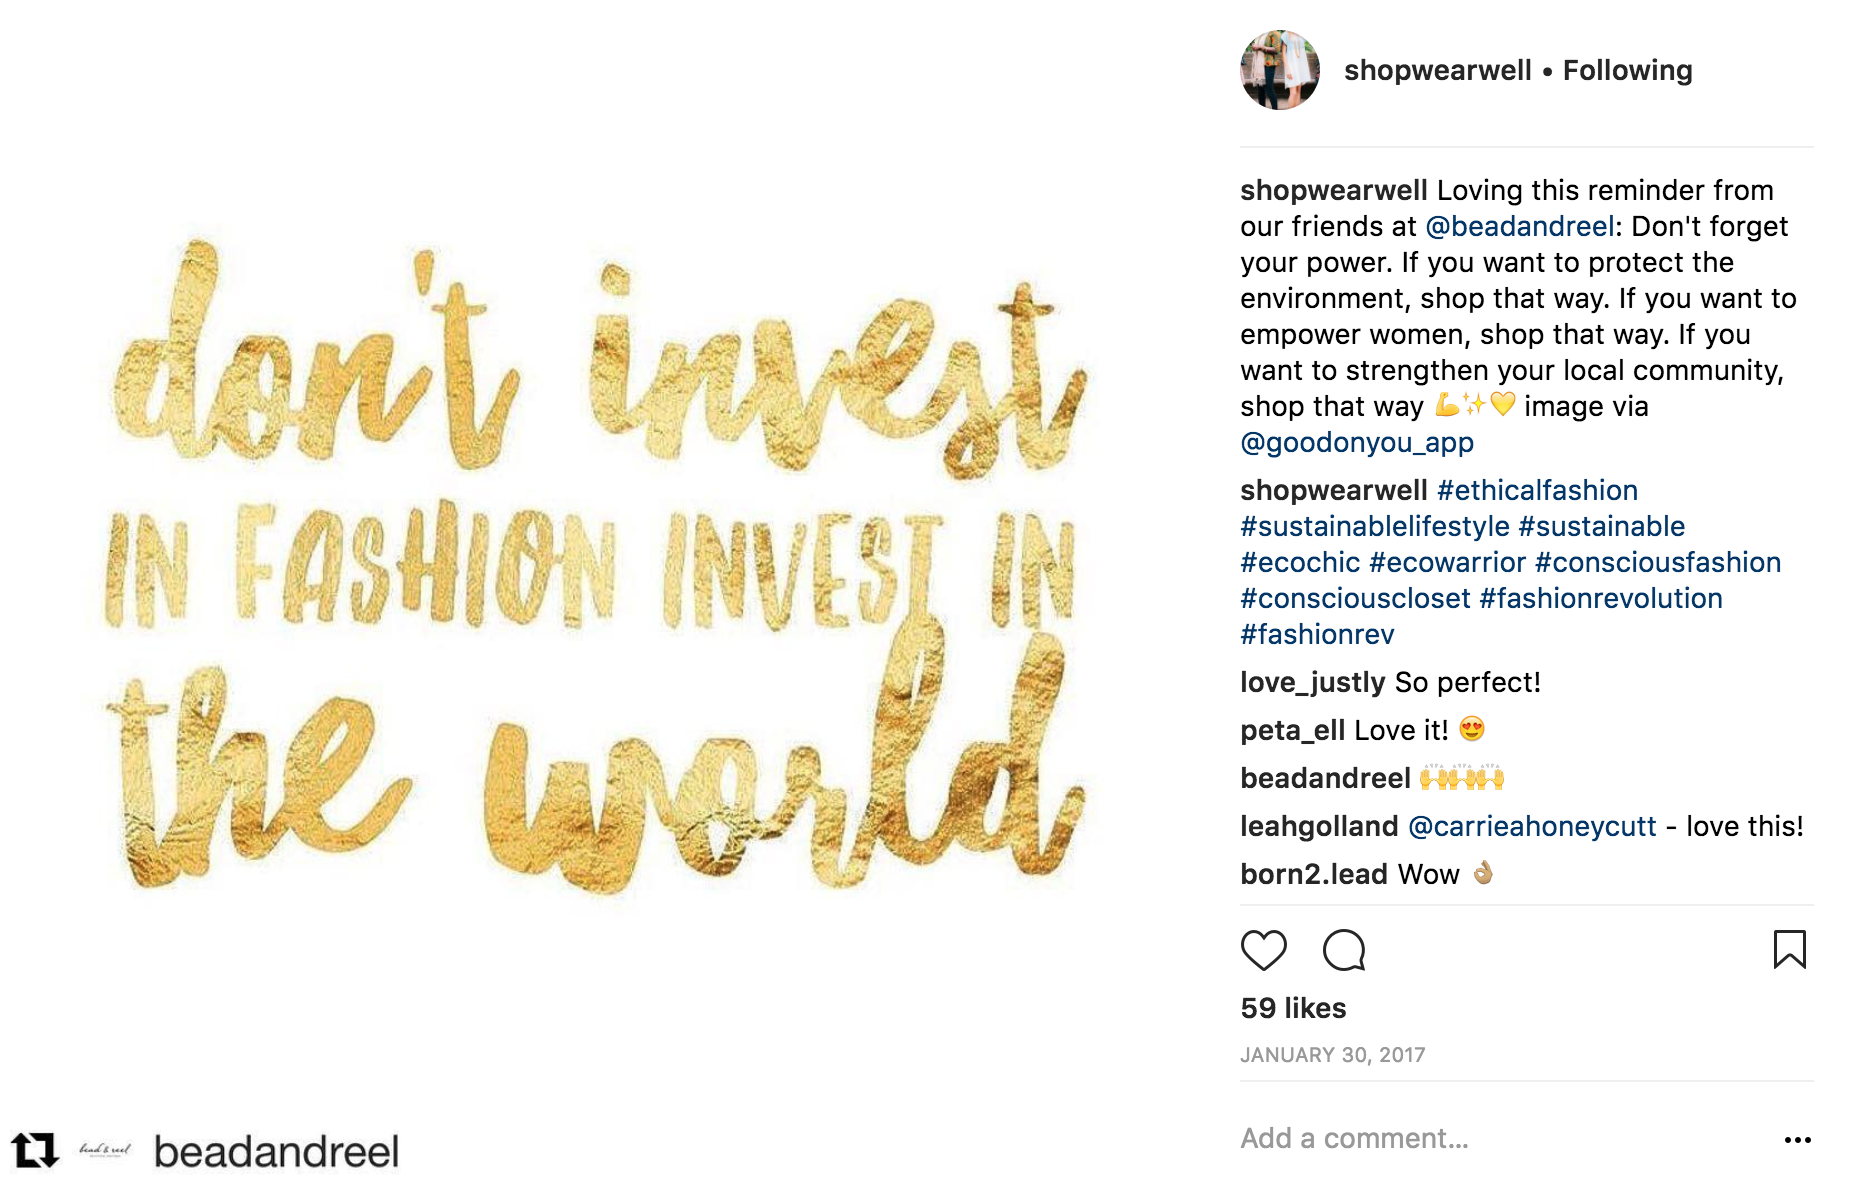 Wearwell uses curated quotes on sustainable fashion to support new online community on Instagram